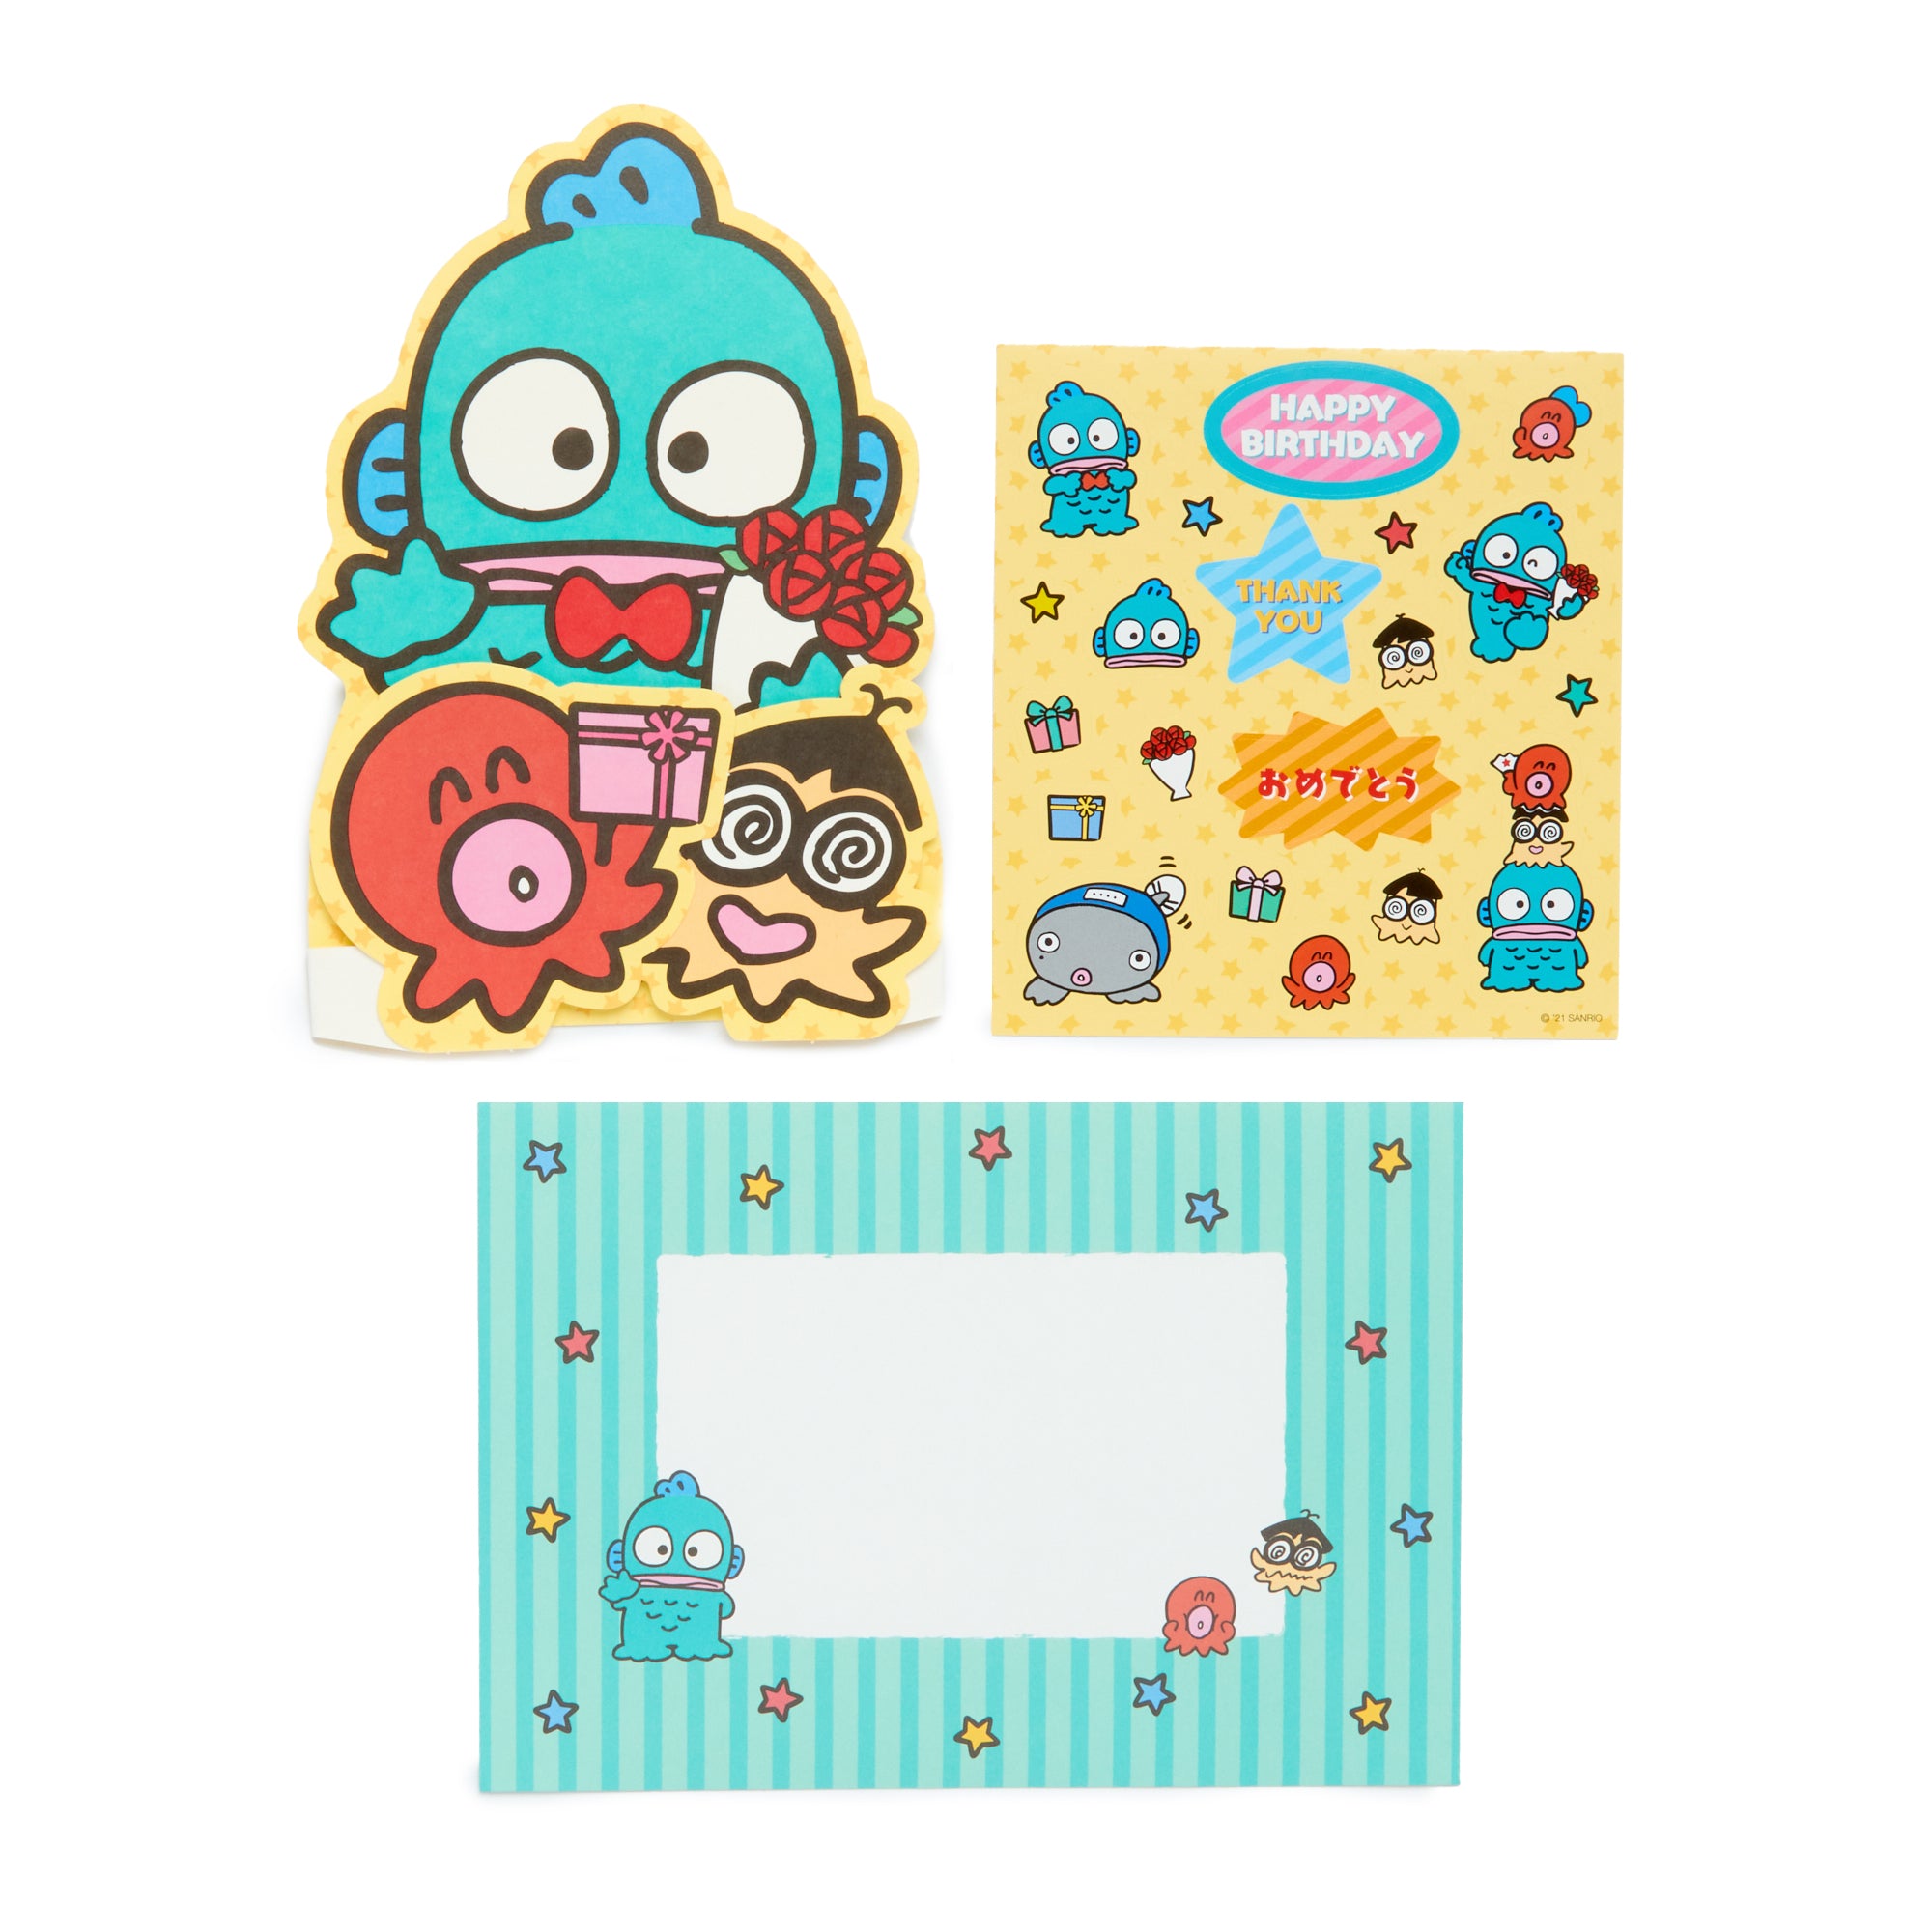 Hangyodon Stickers and Greeting Card Stationery Japan Original   